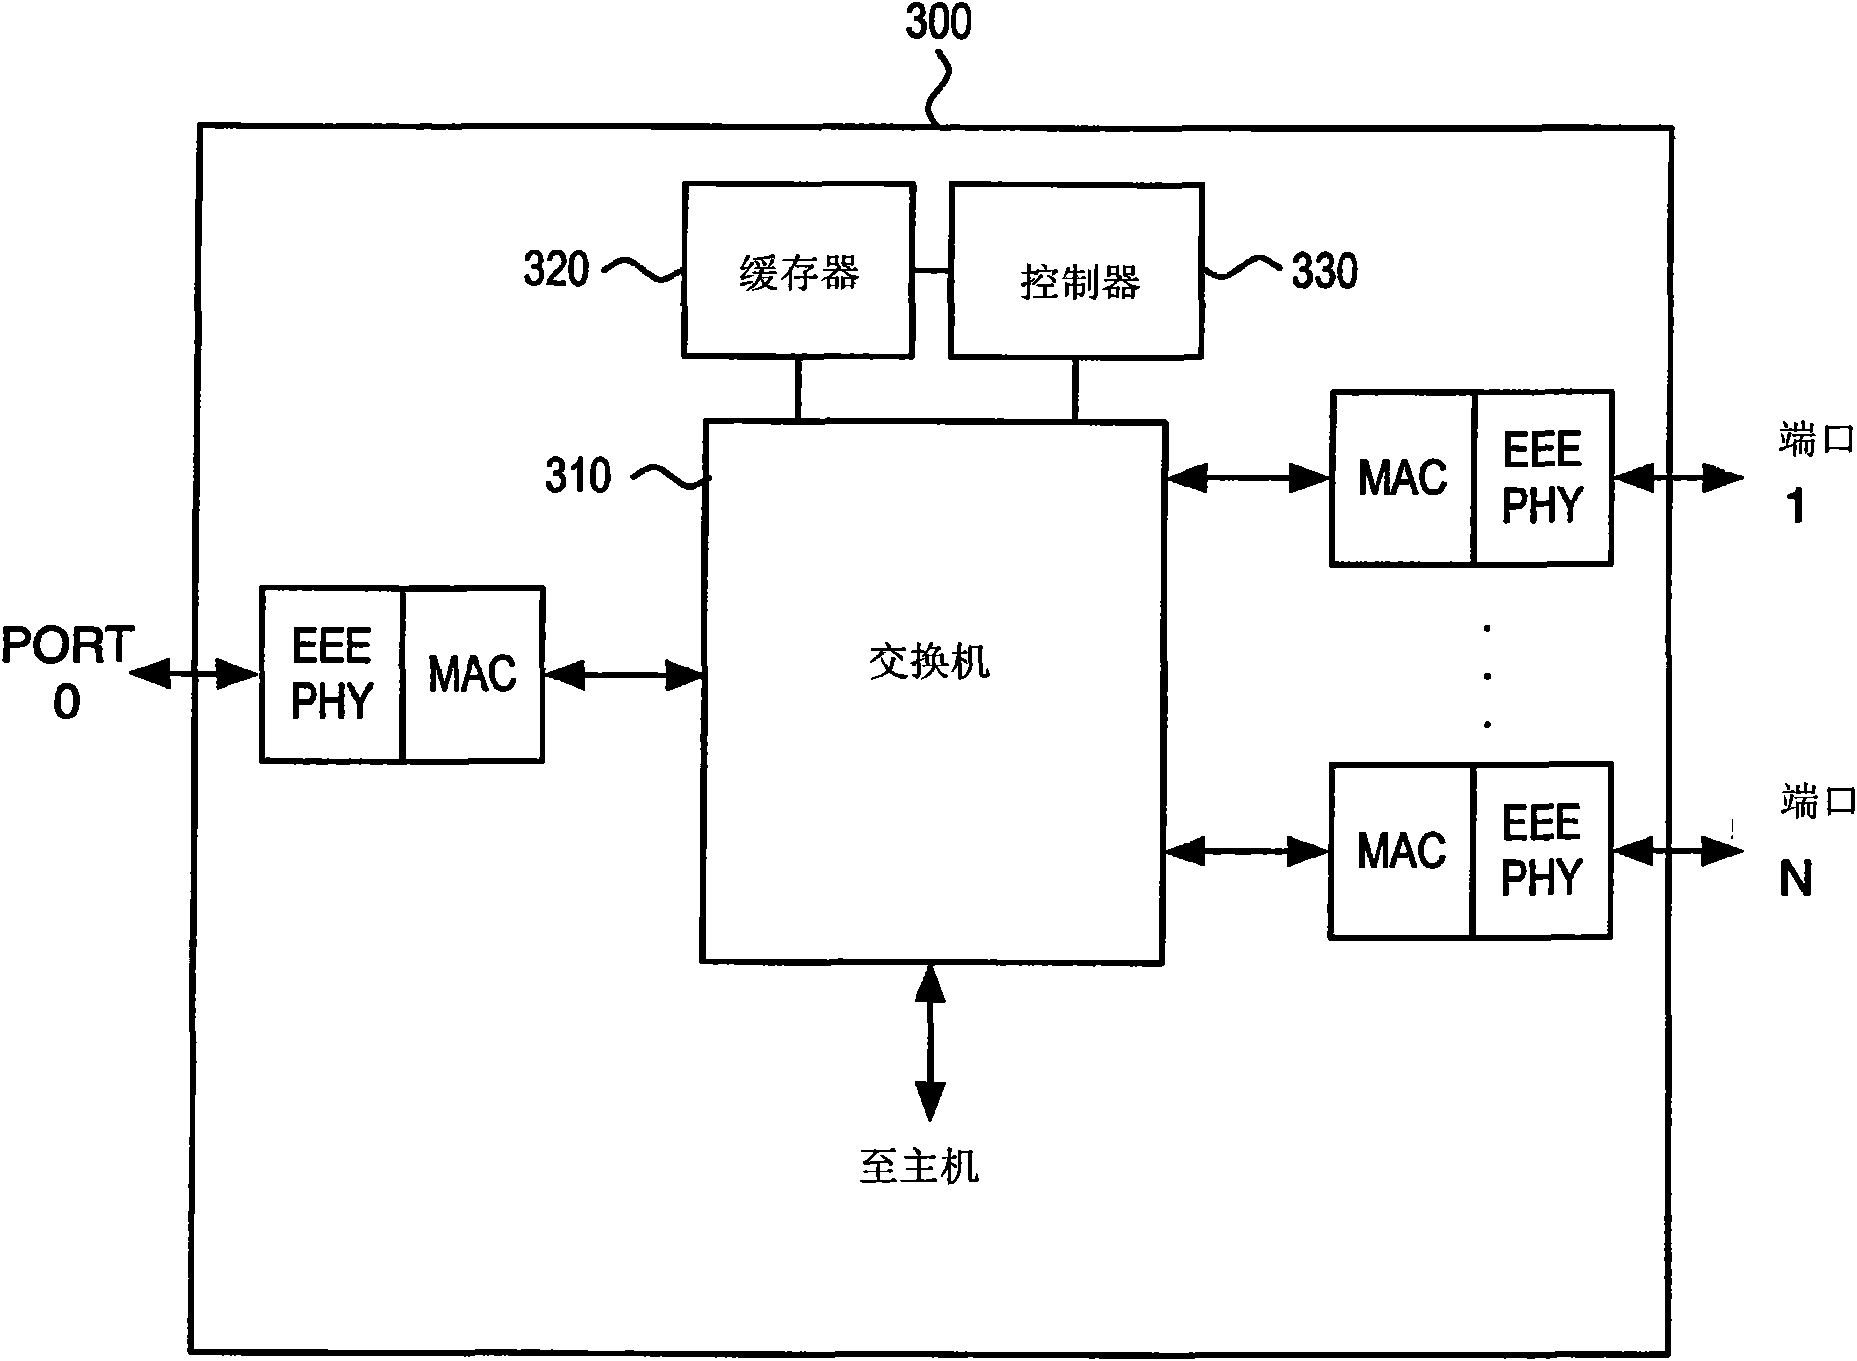 Ethernet method and method applied in the ethernet